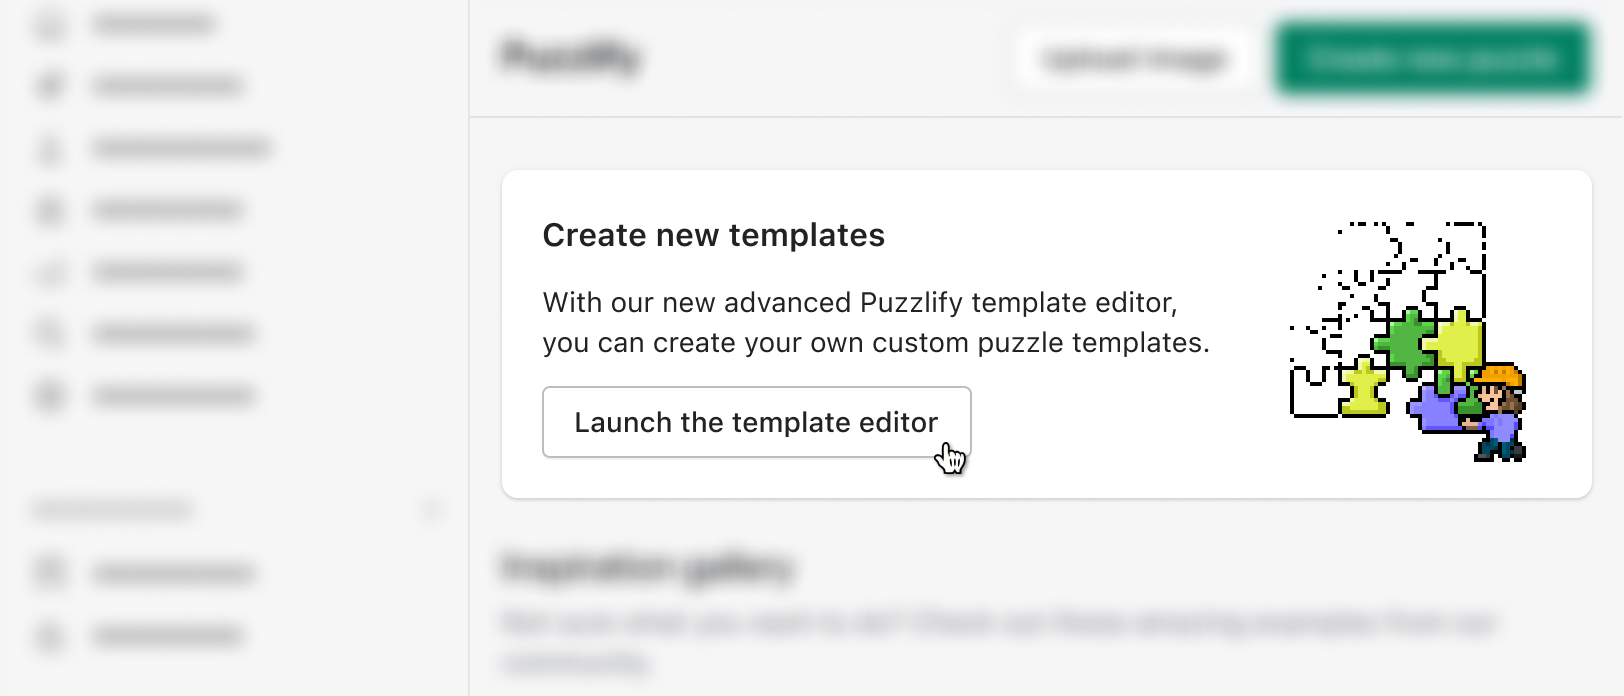 A card in the app body that invites the merchant to ‘Launch the template editor’.